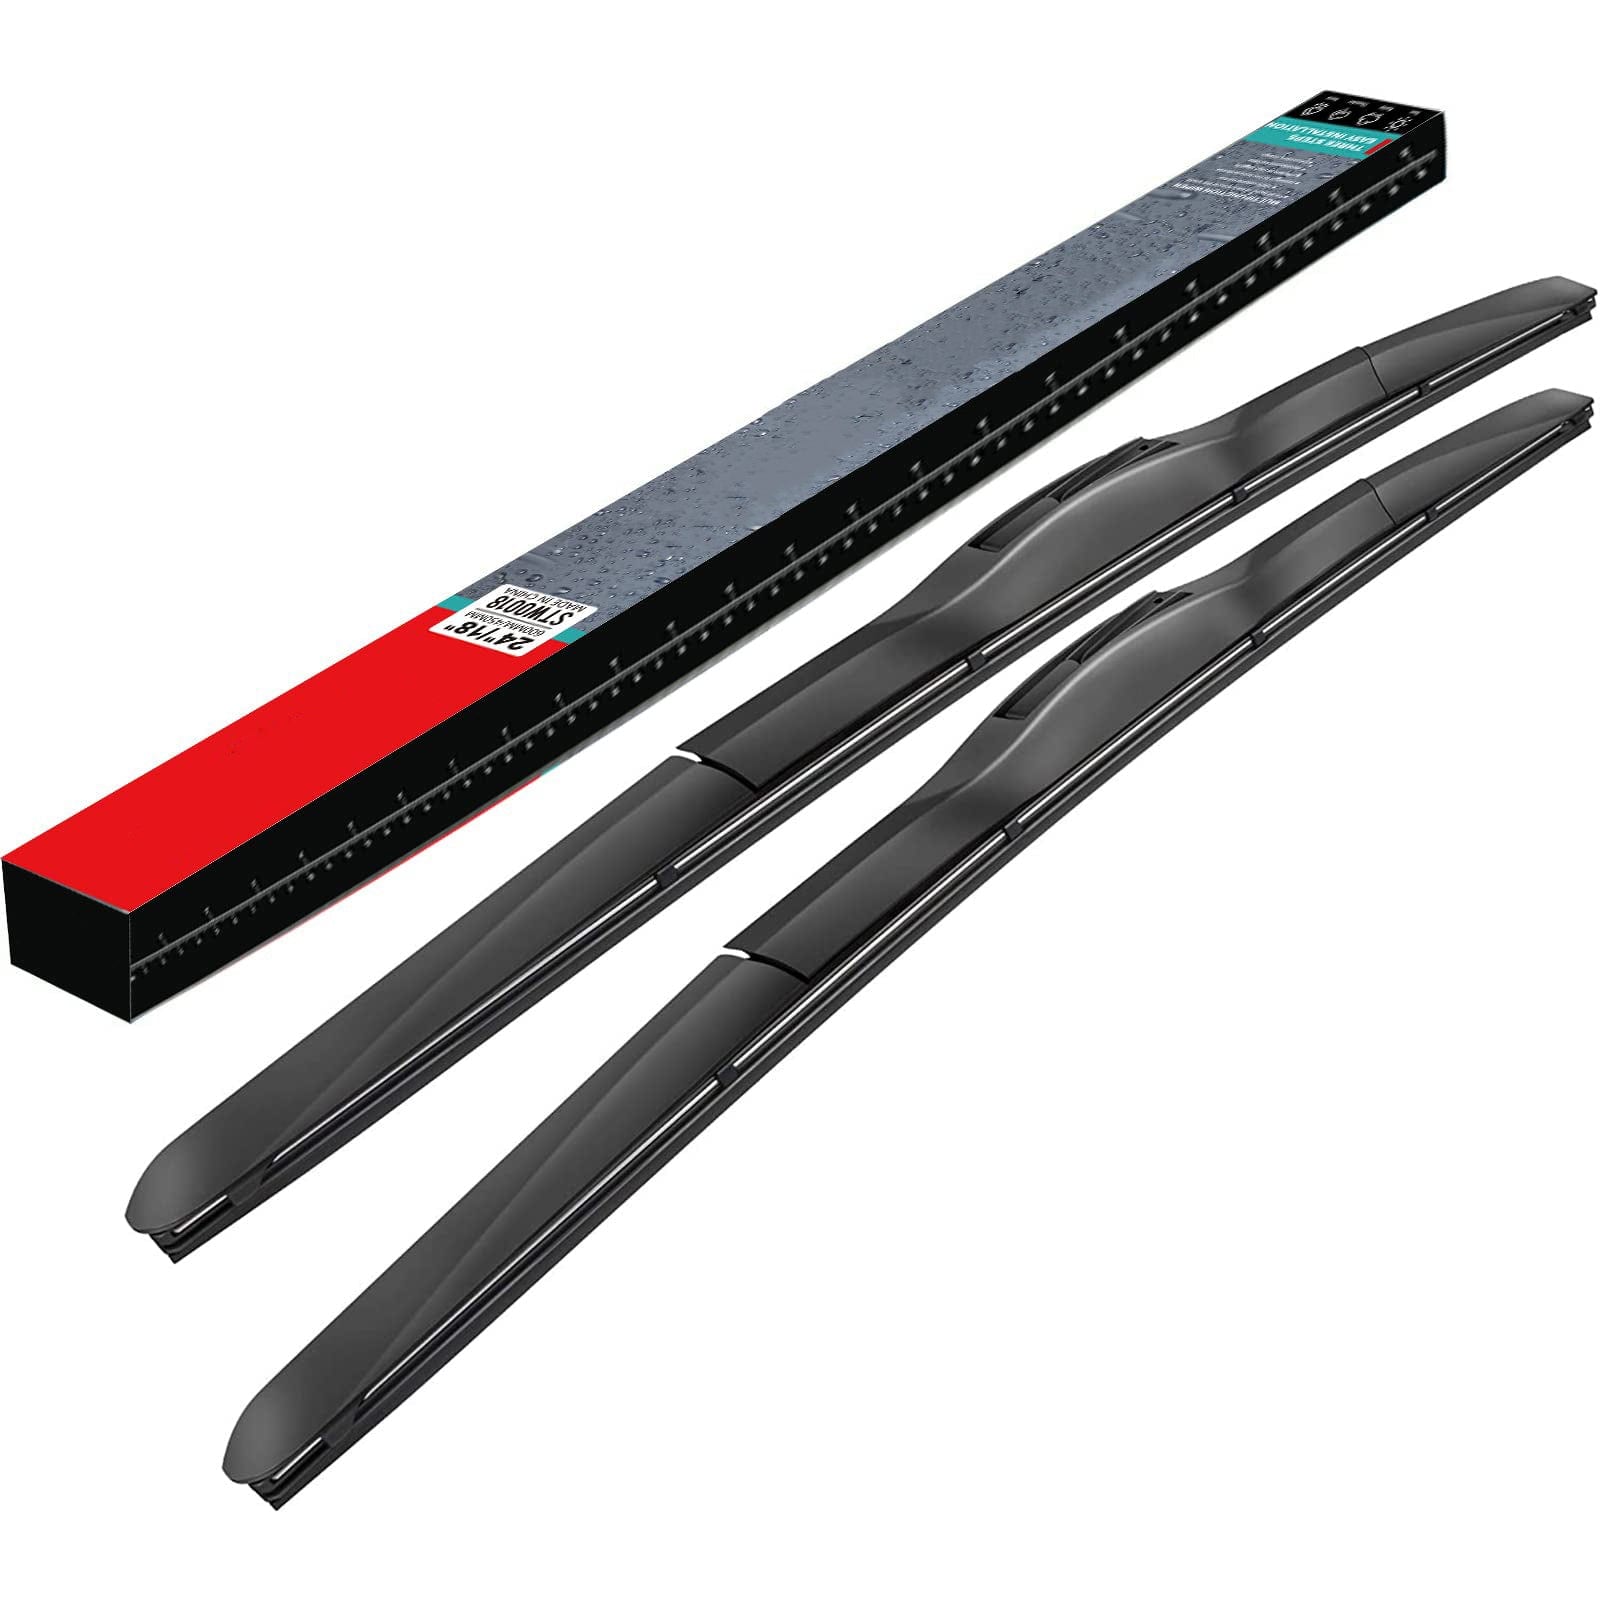 GARVEE 26 Inch 18Inch Wiper Blades Premium All-Seasons Durable Stable And Quiet OEM Quality J&U